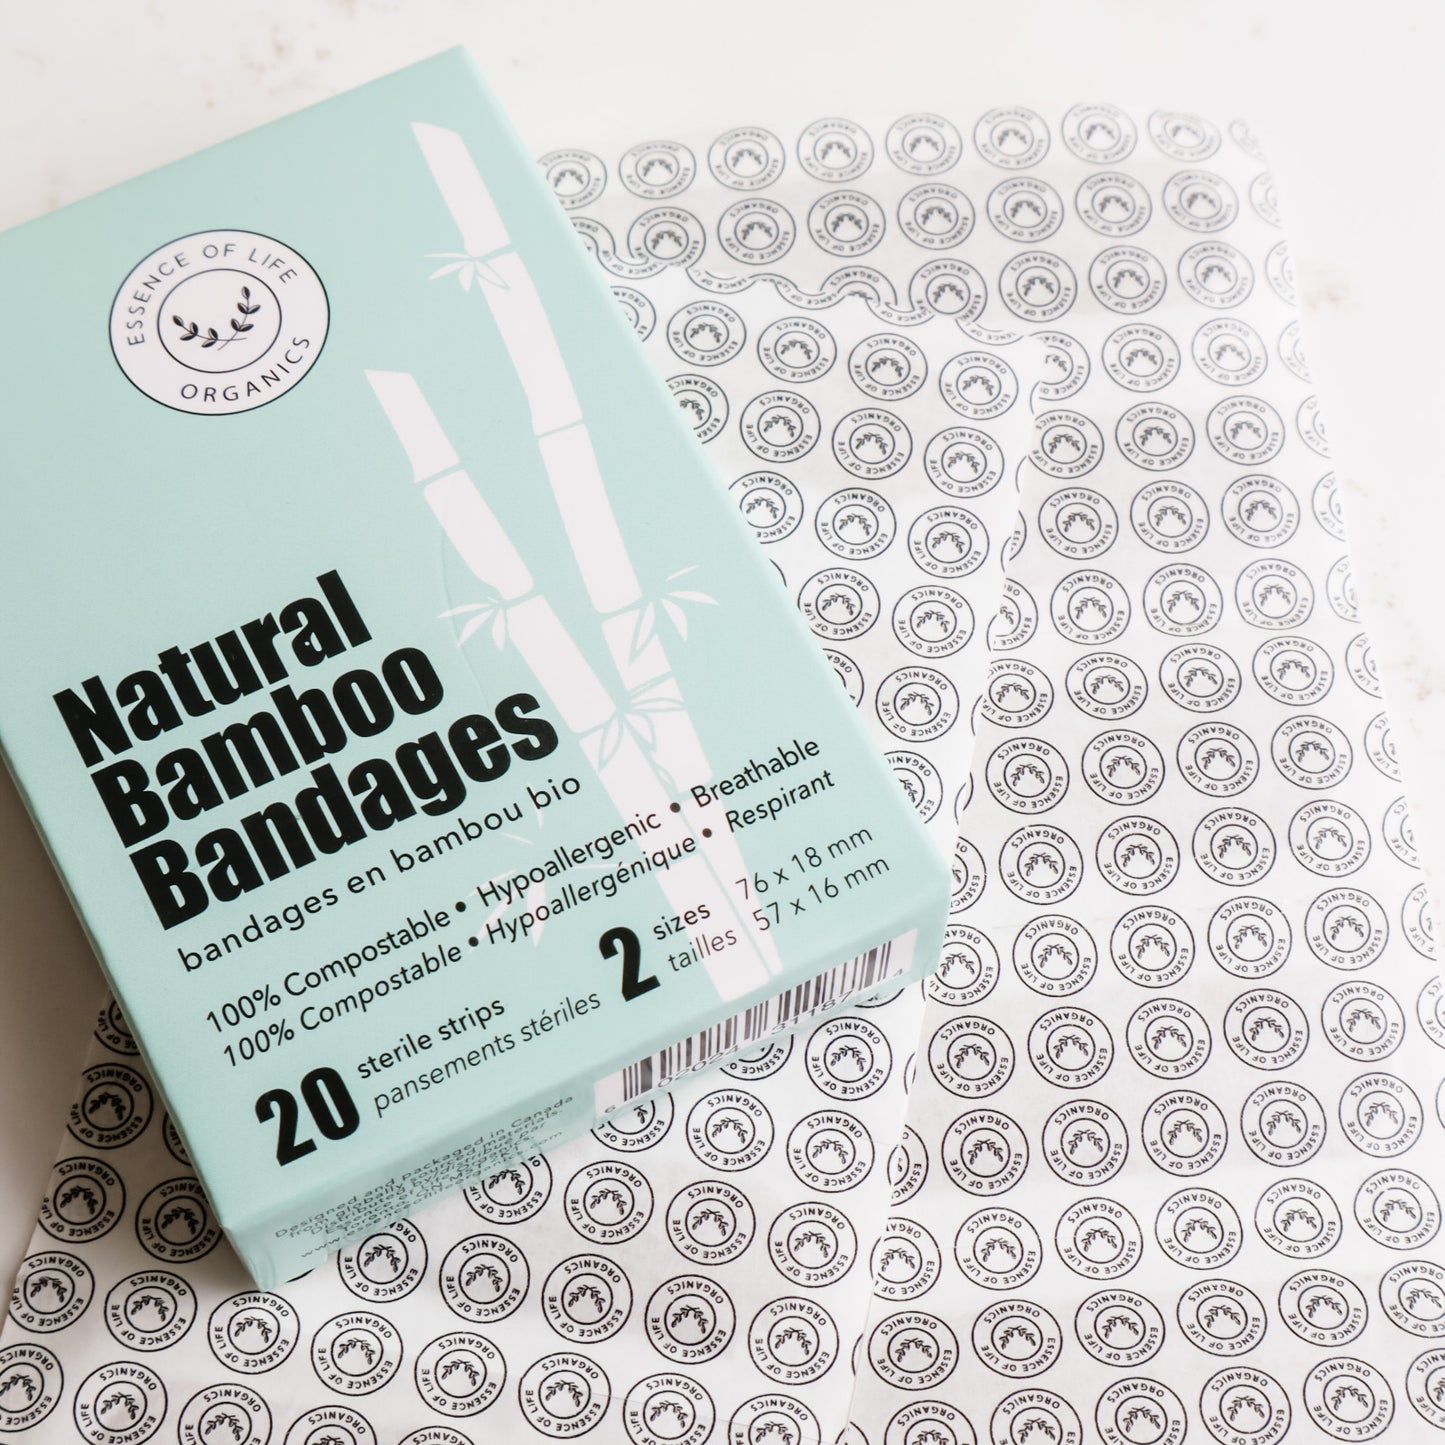 100% Biodegradable Bamboo Bandages- 20 Strips